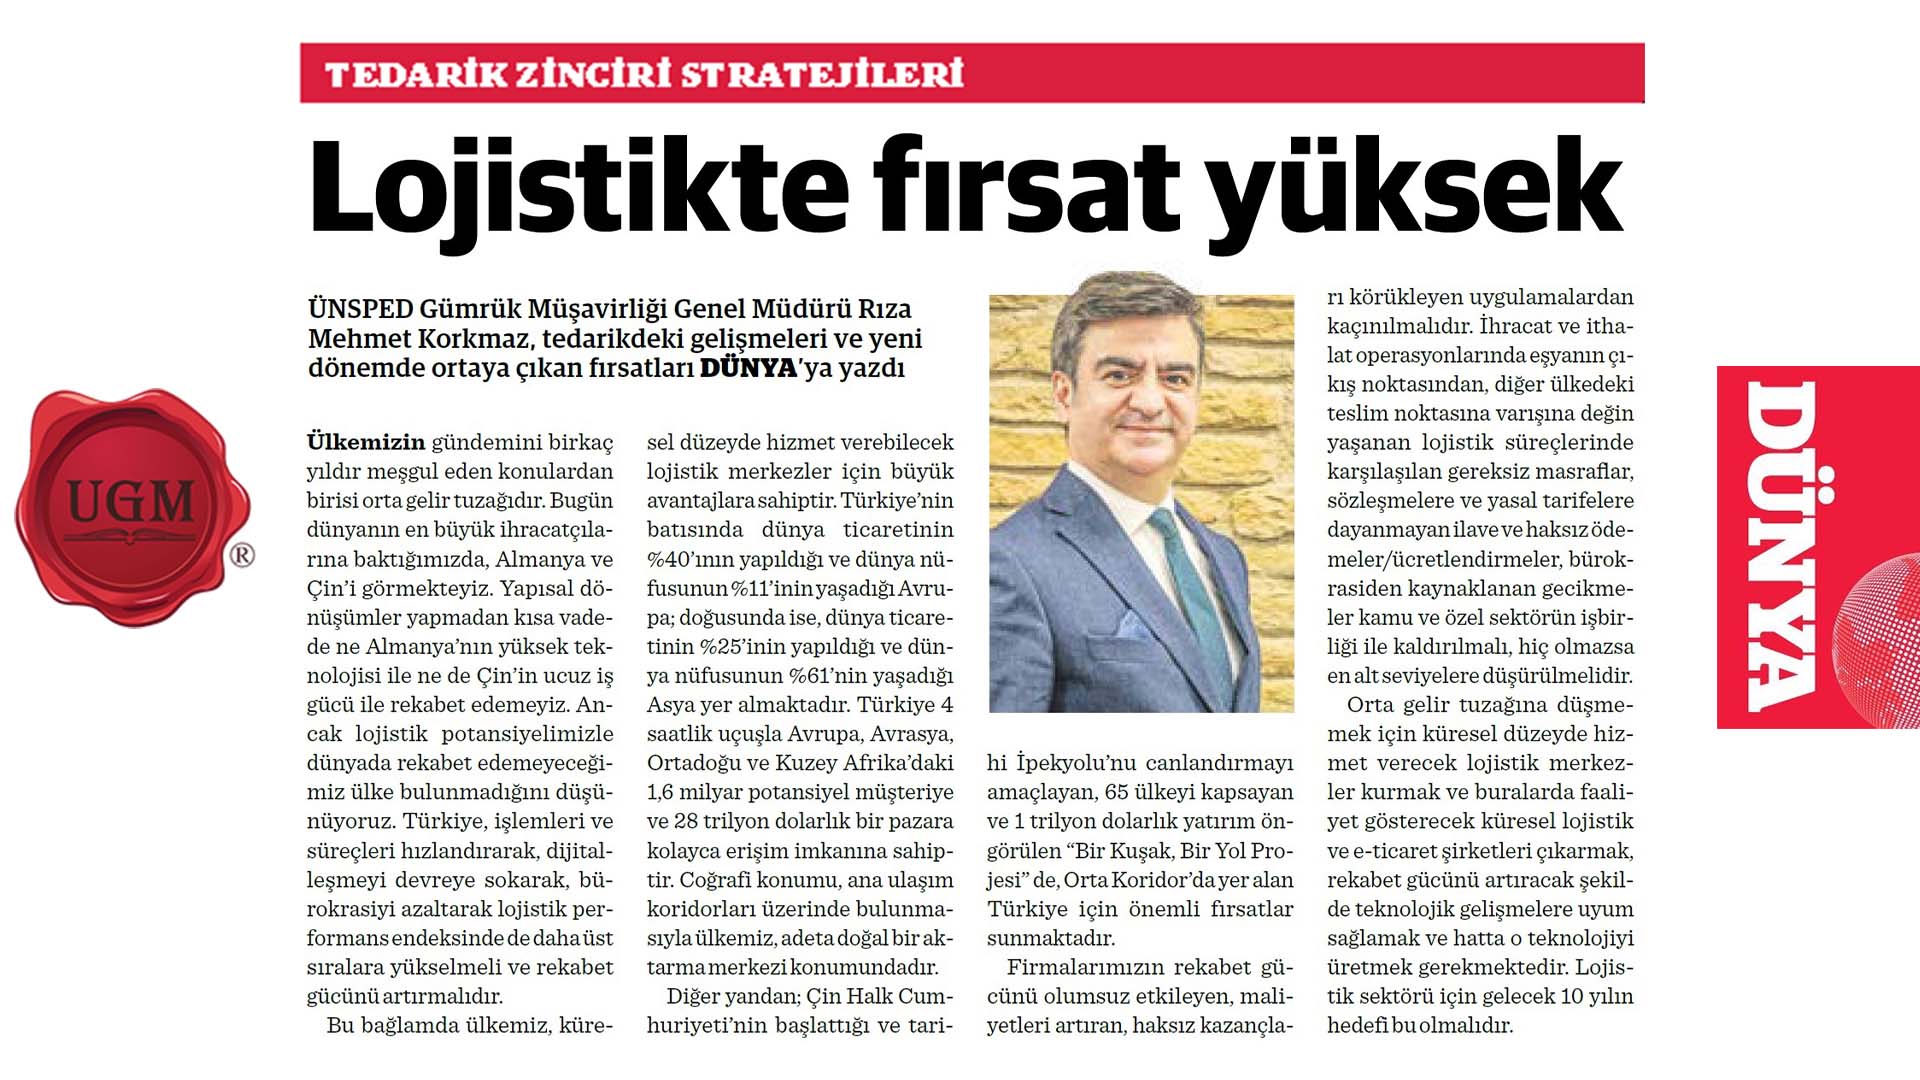 Rıza Mehmet Korkmaz, General Manager of UNSPED customs brokerage, wrote about the developments in supply and the opportunities that arise in the new era for DÜNYA. 